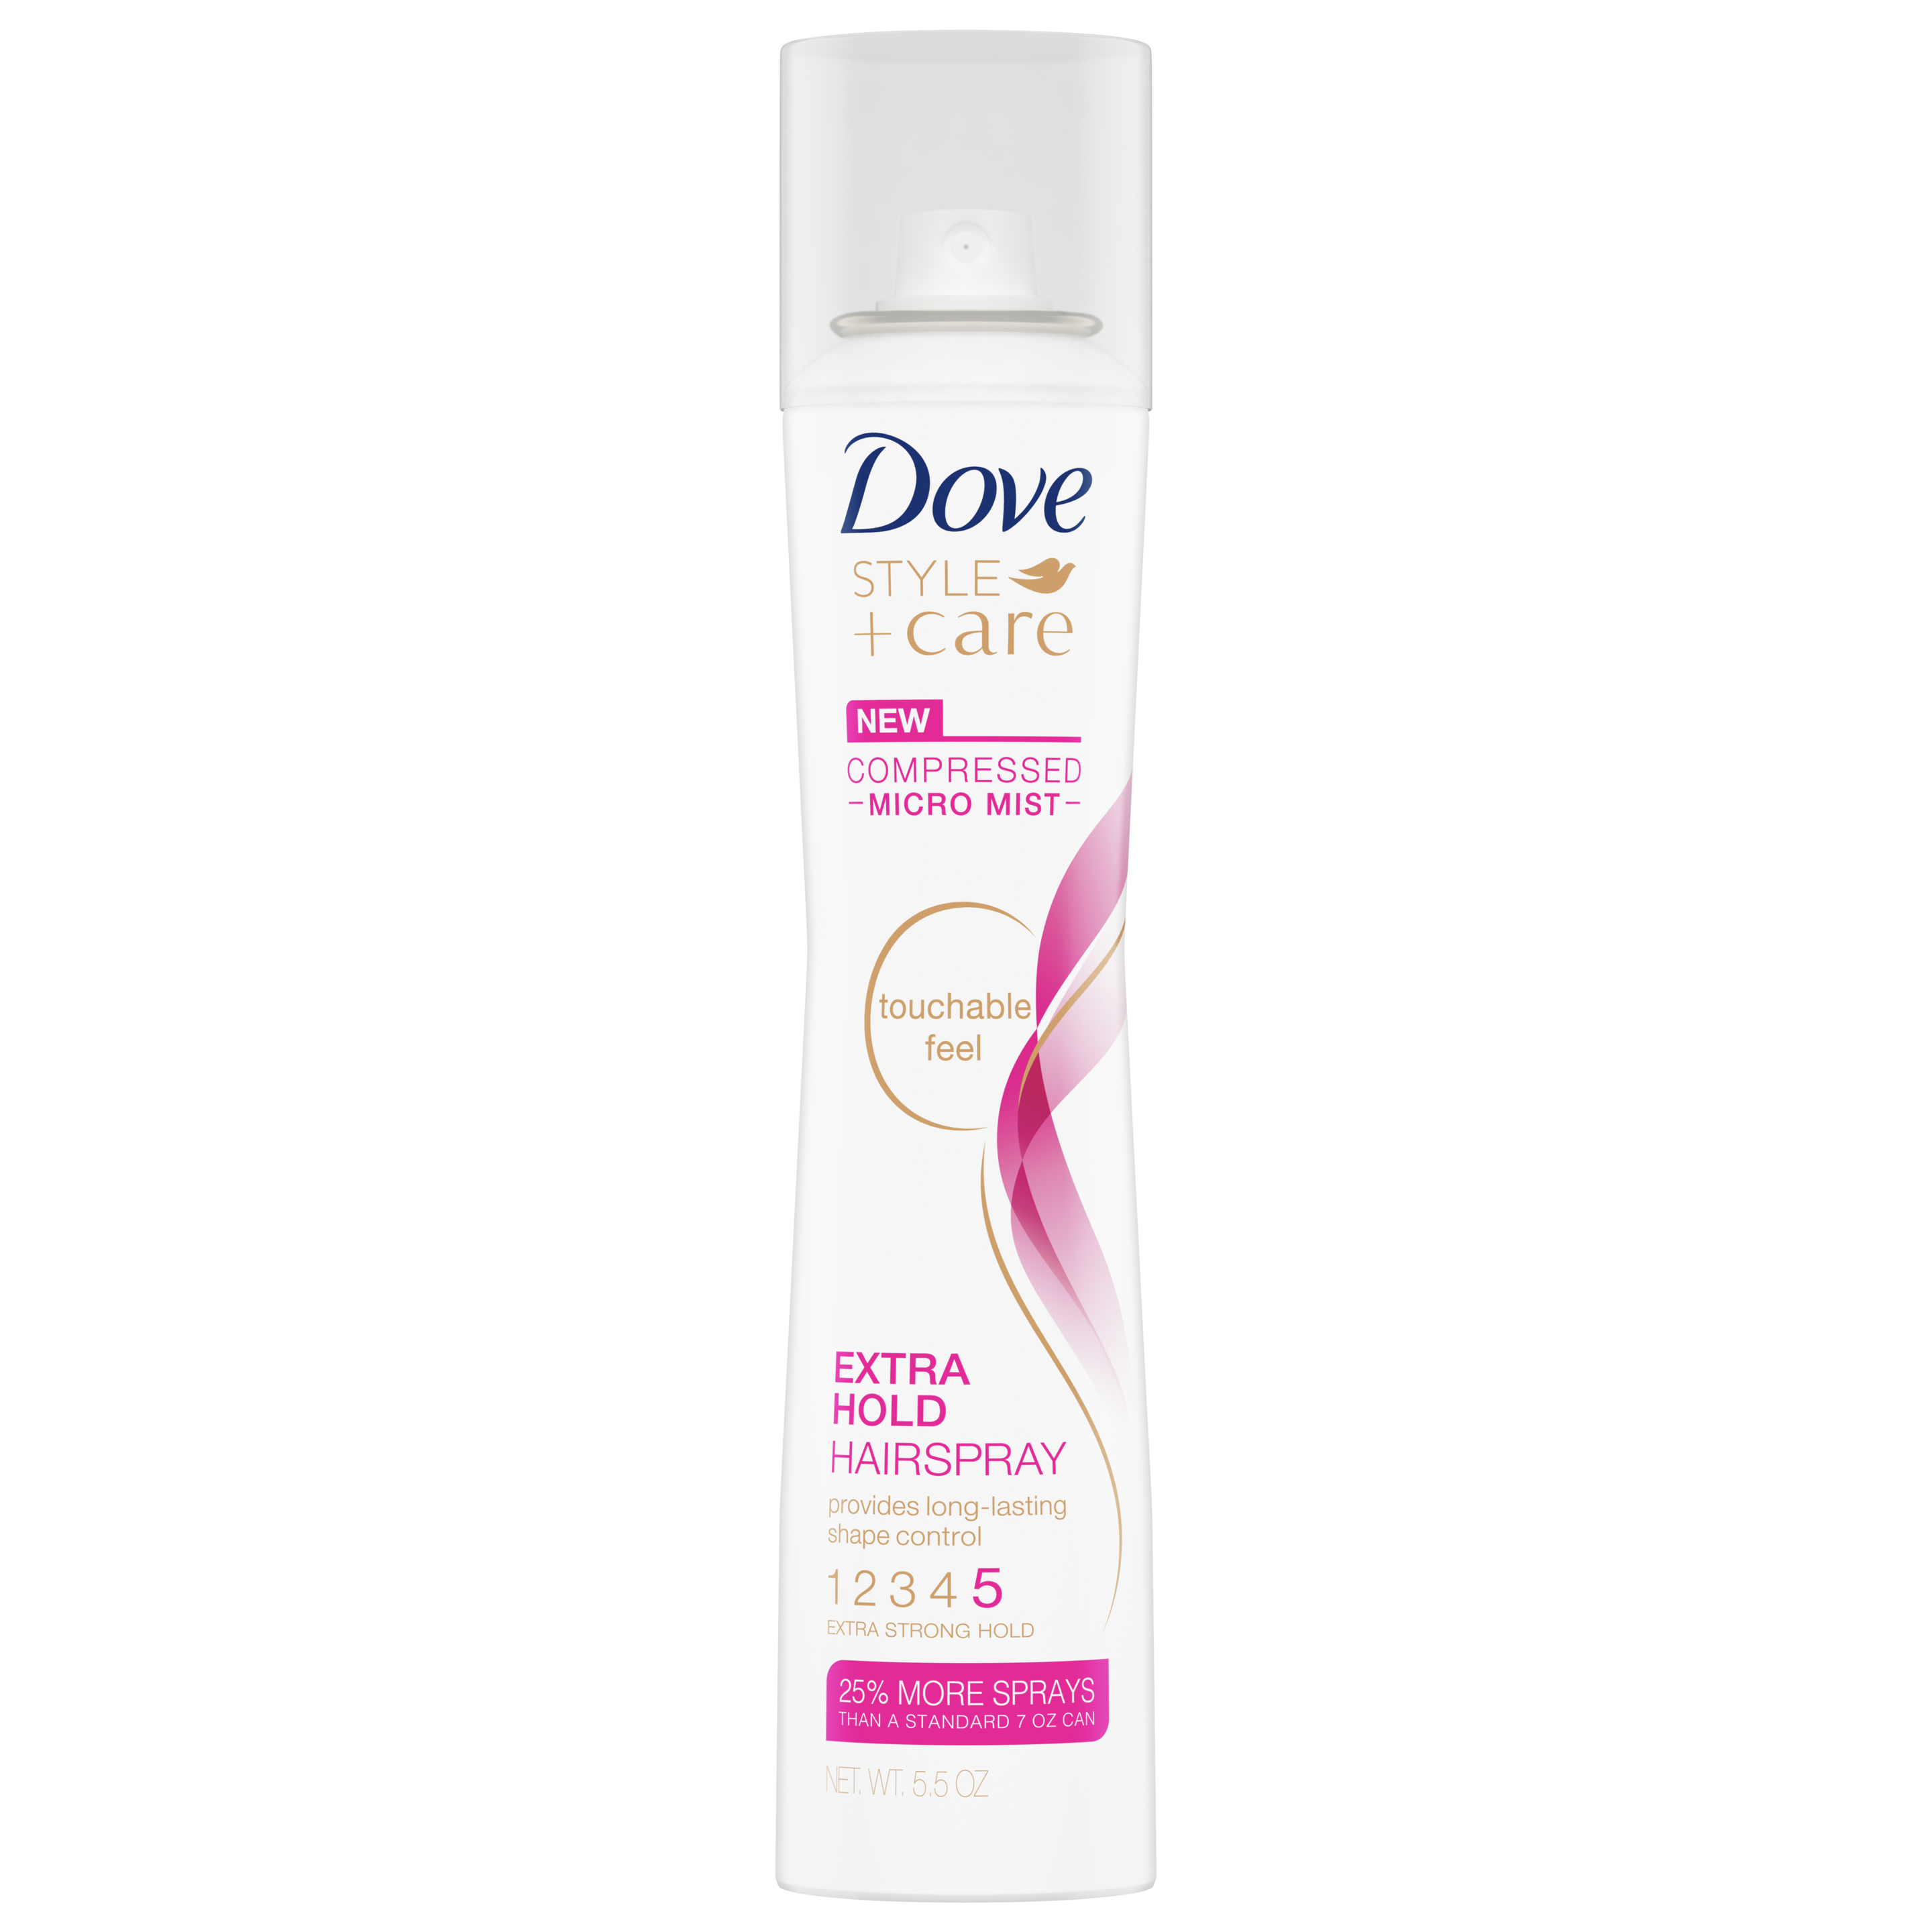 Dove Style+Care Compressed Extra Hold Hairspray  5.5oz